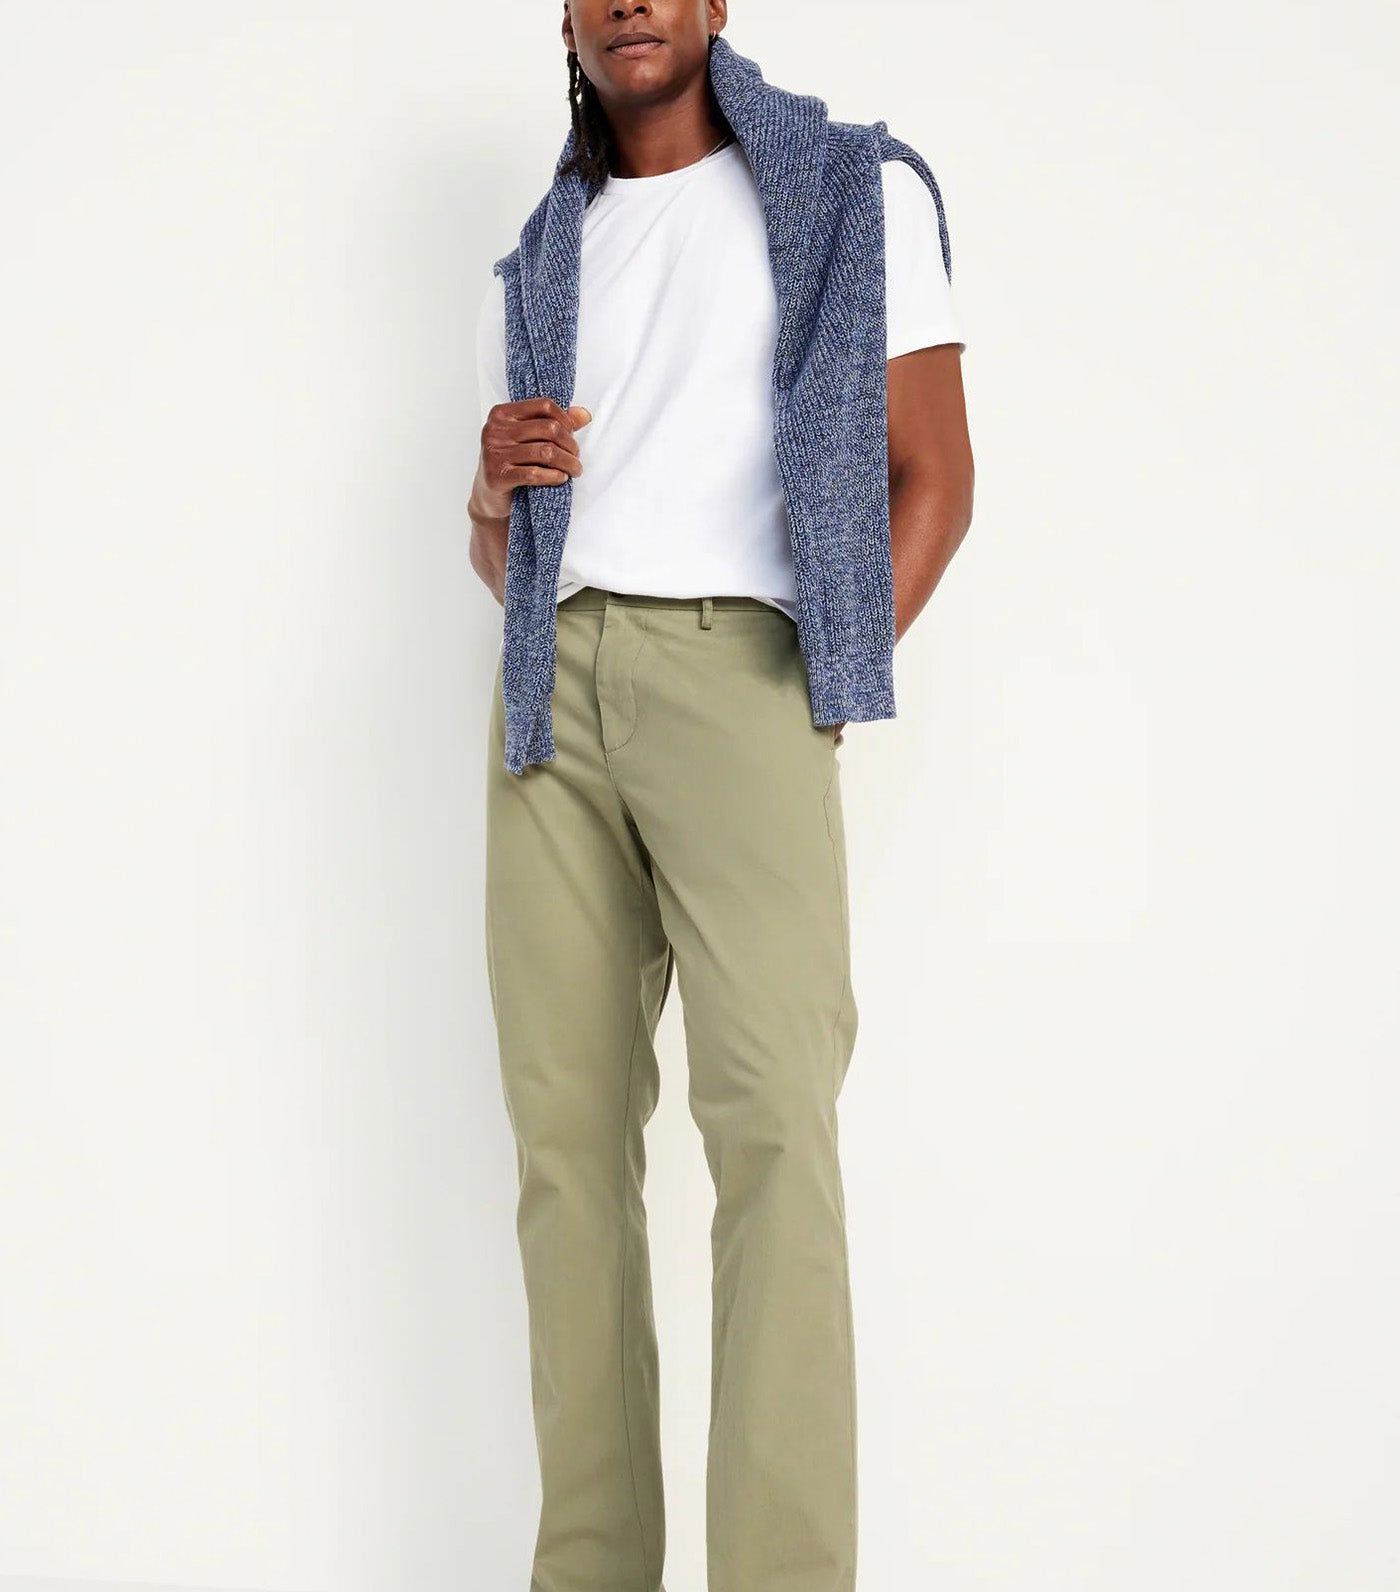 Straight Built-In Flex Rotation Chino Pants for Men Simply Sage